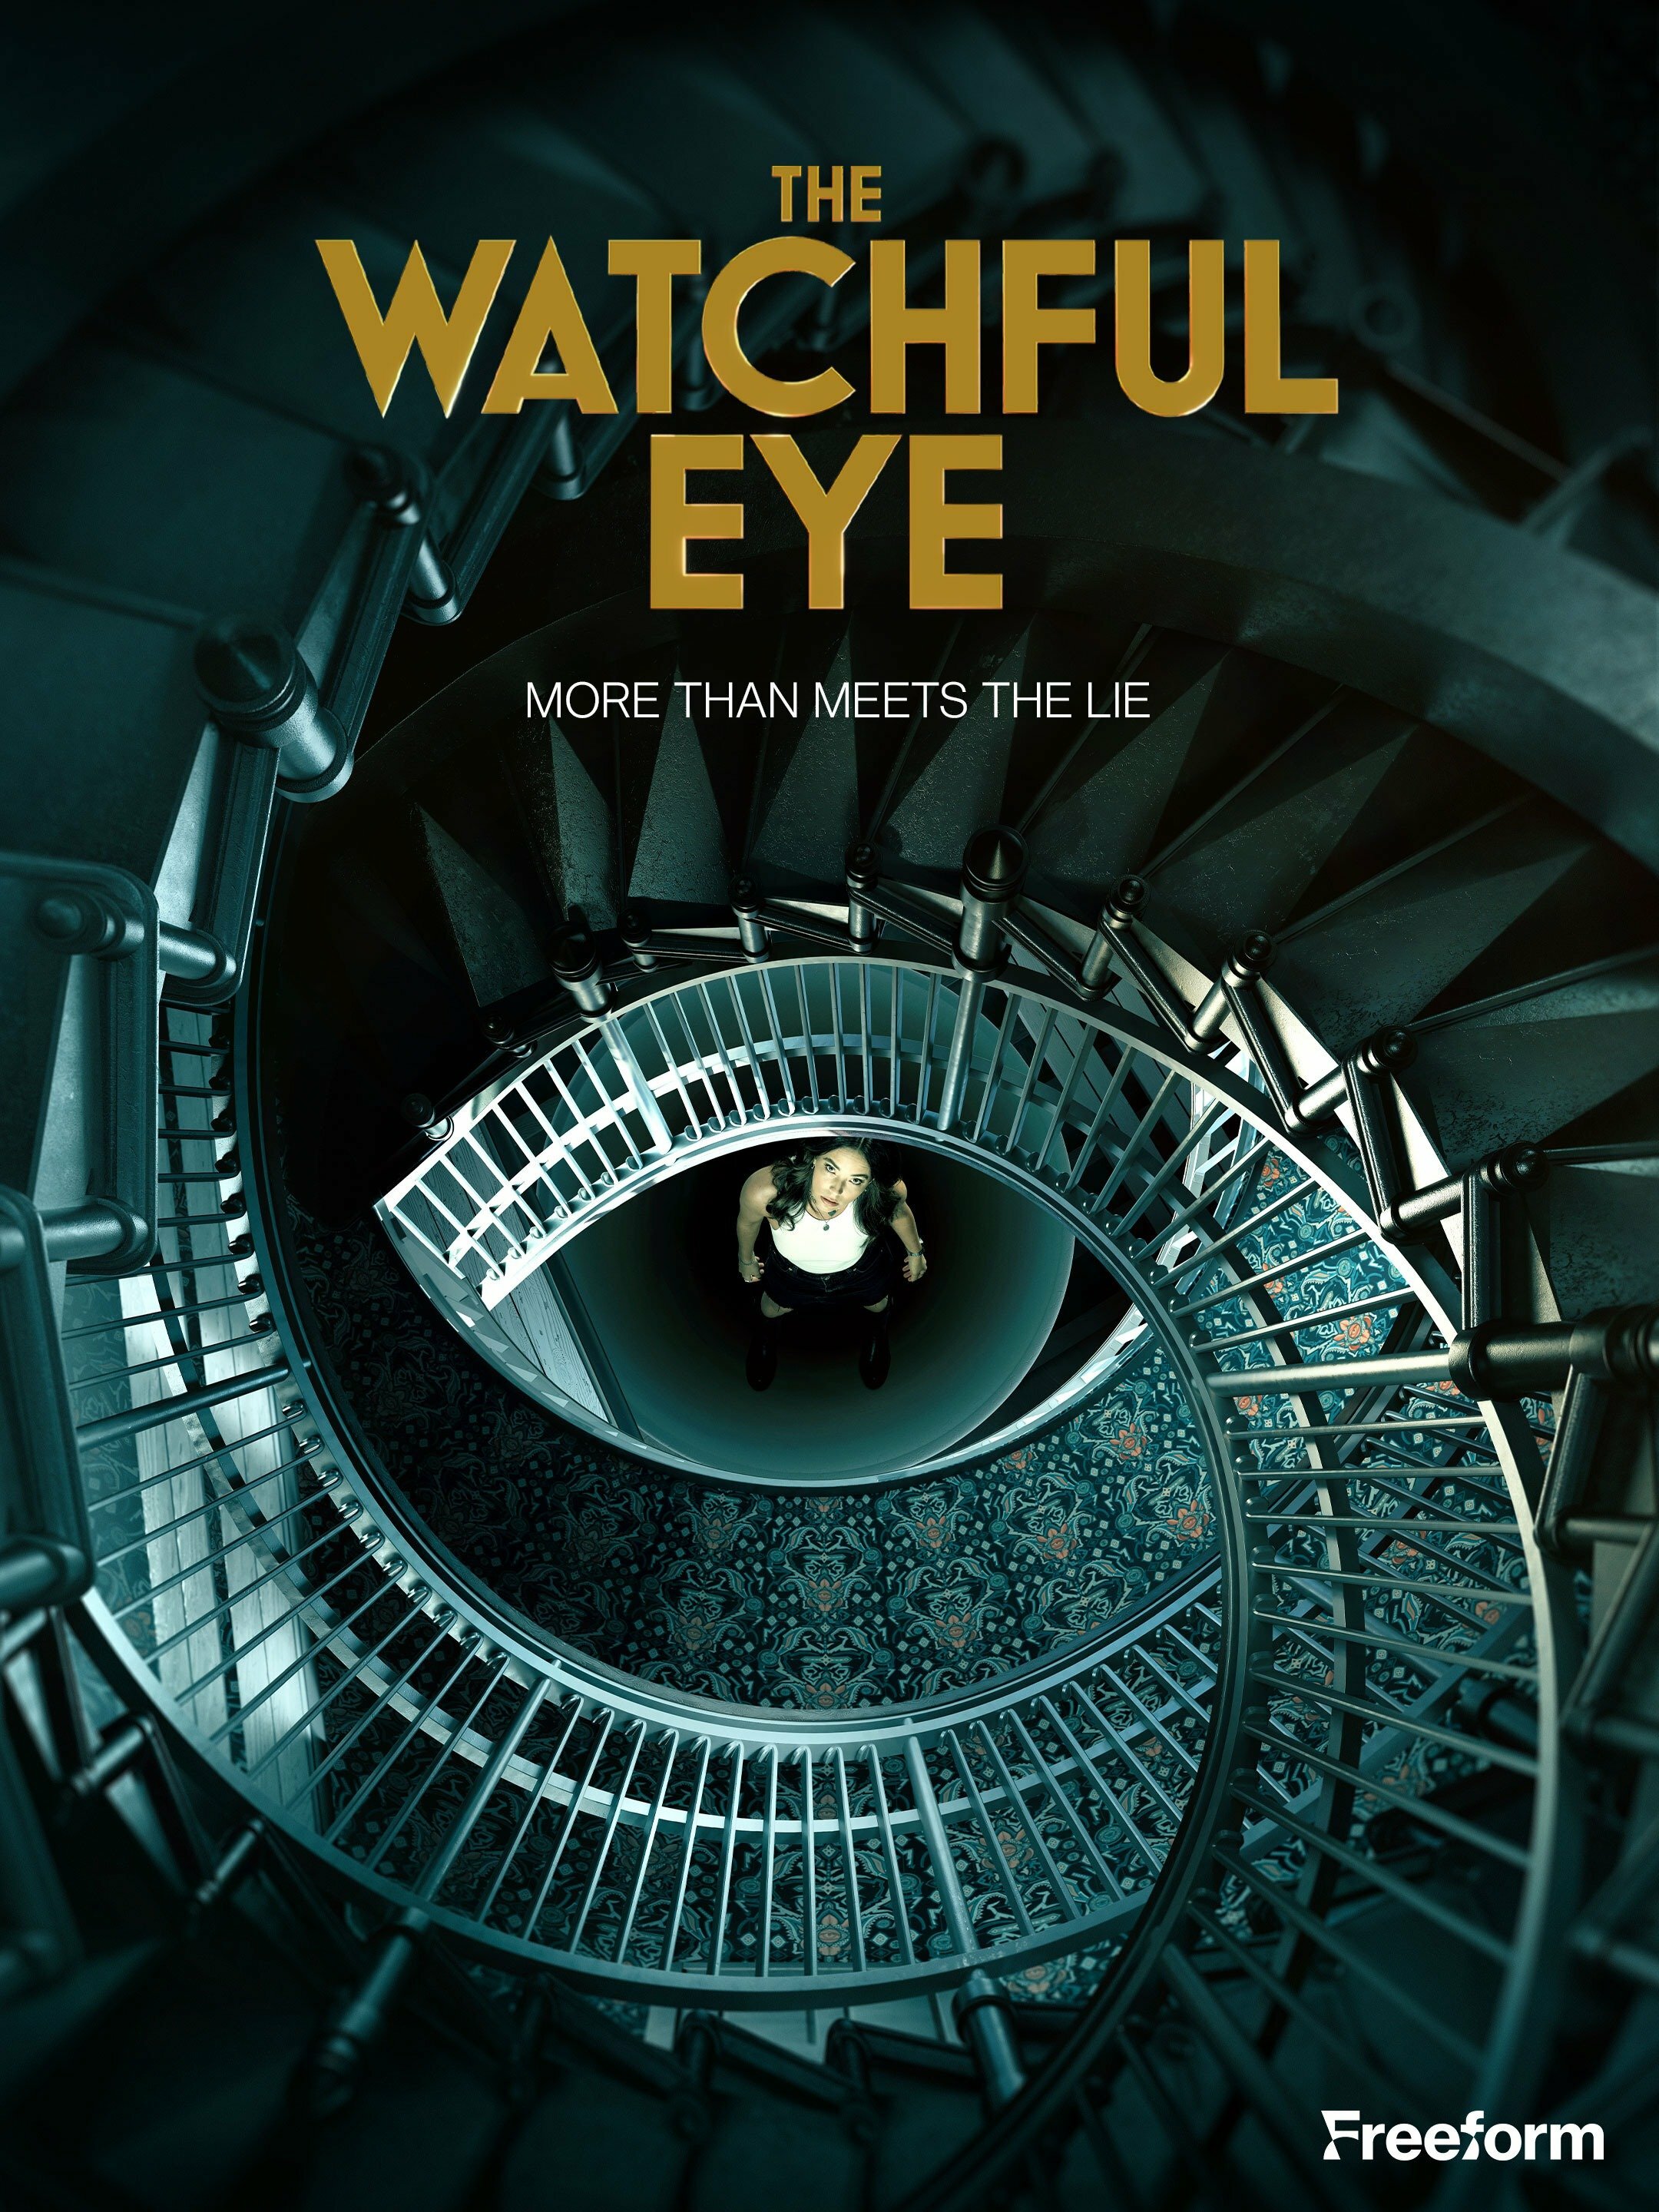 The Watchful Eye S01E04 The Nanny Vanishes 1080p WEBRip DDP5 1 H265-D3G